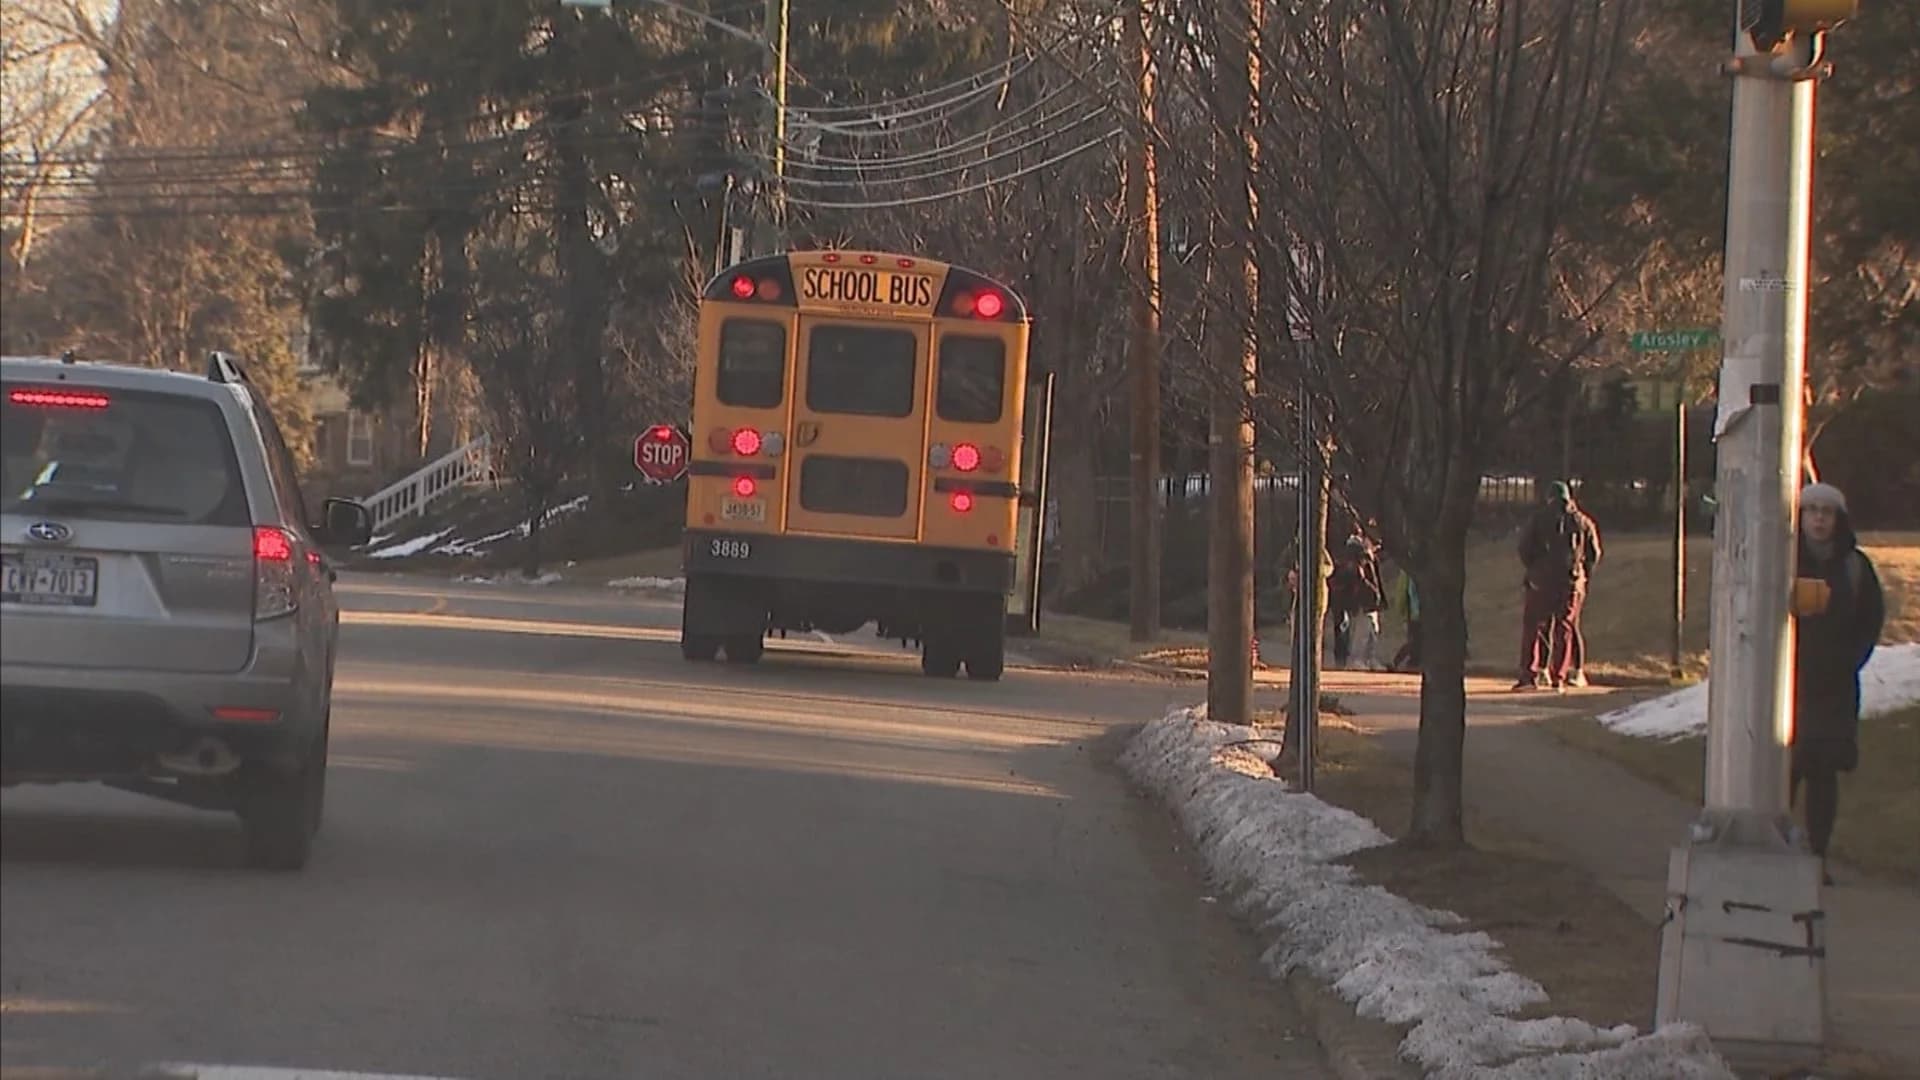 New initiative in Montclair has unmarked police cars following school buses